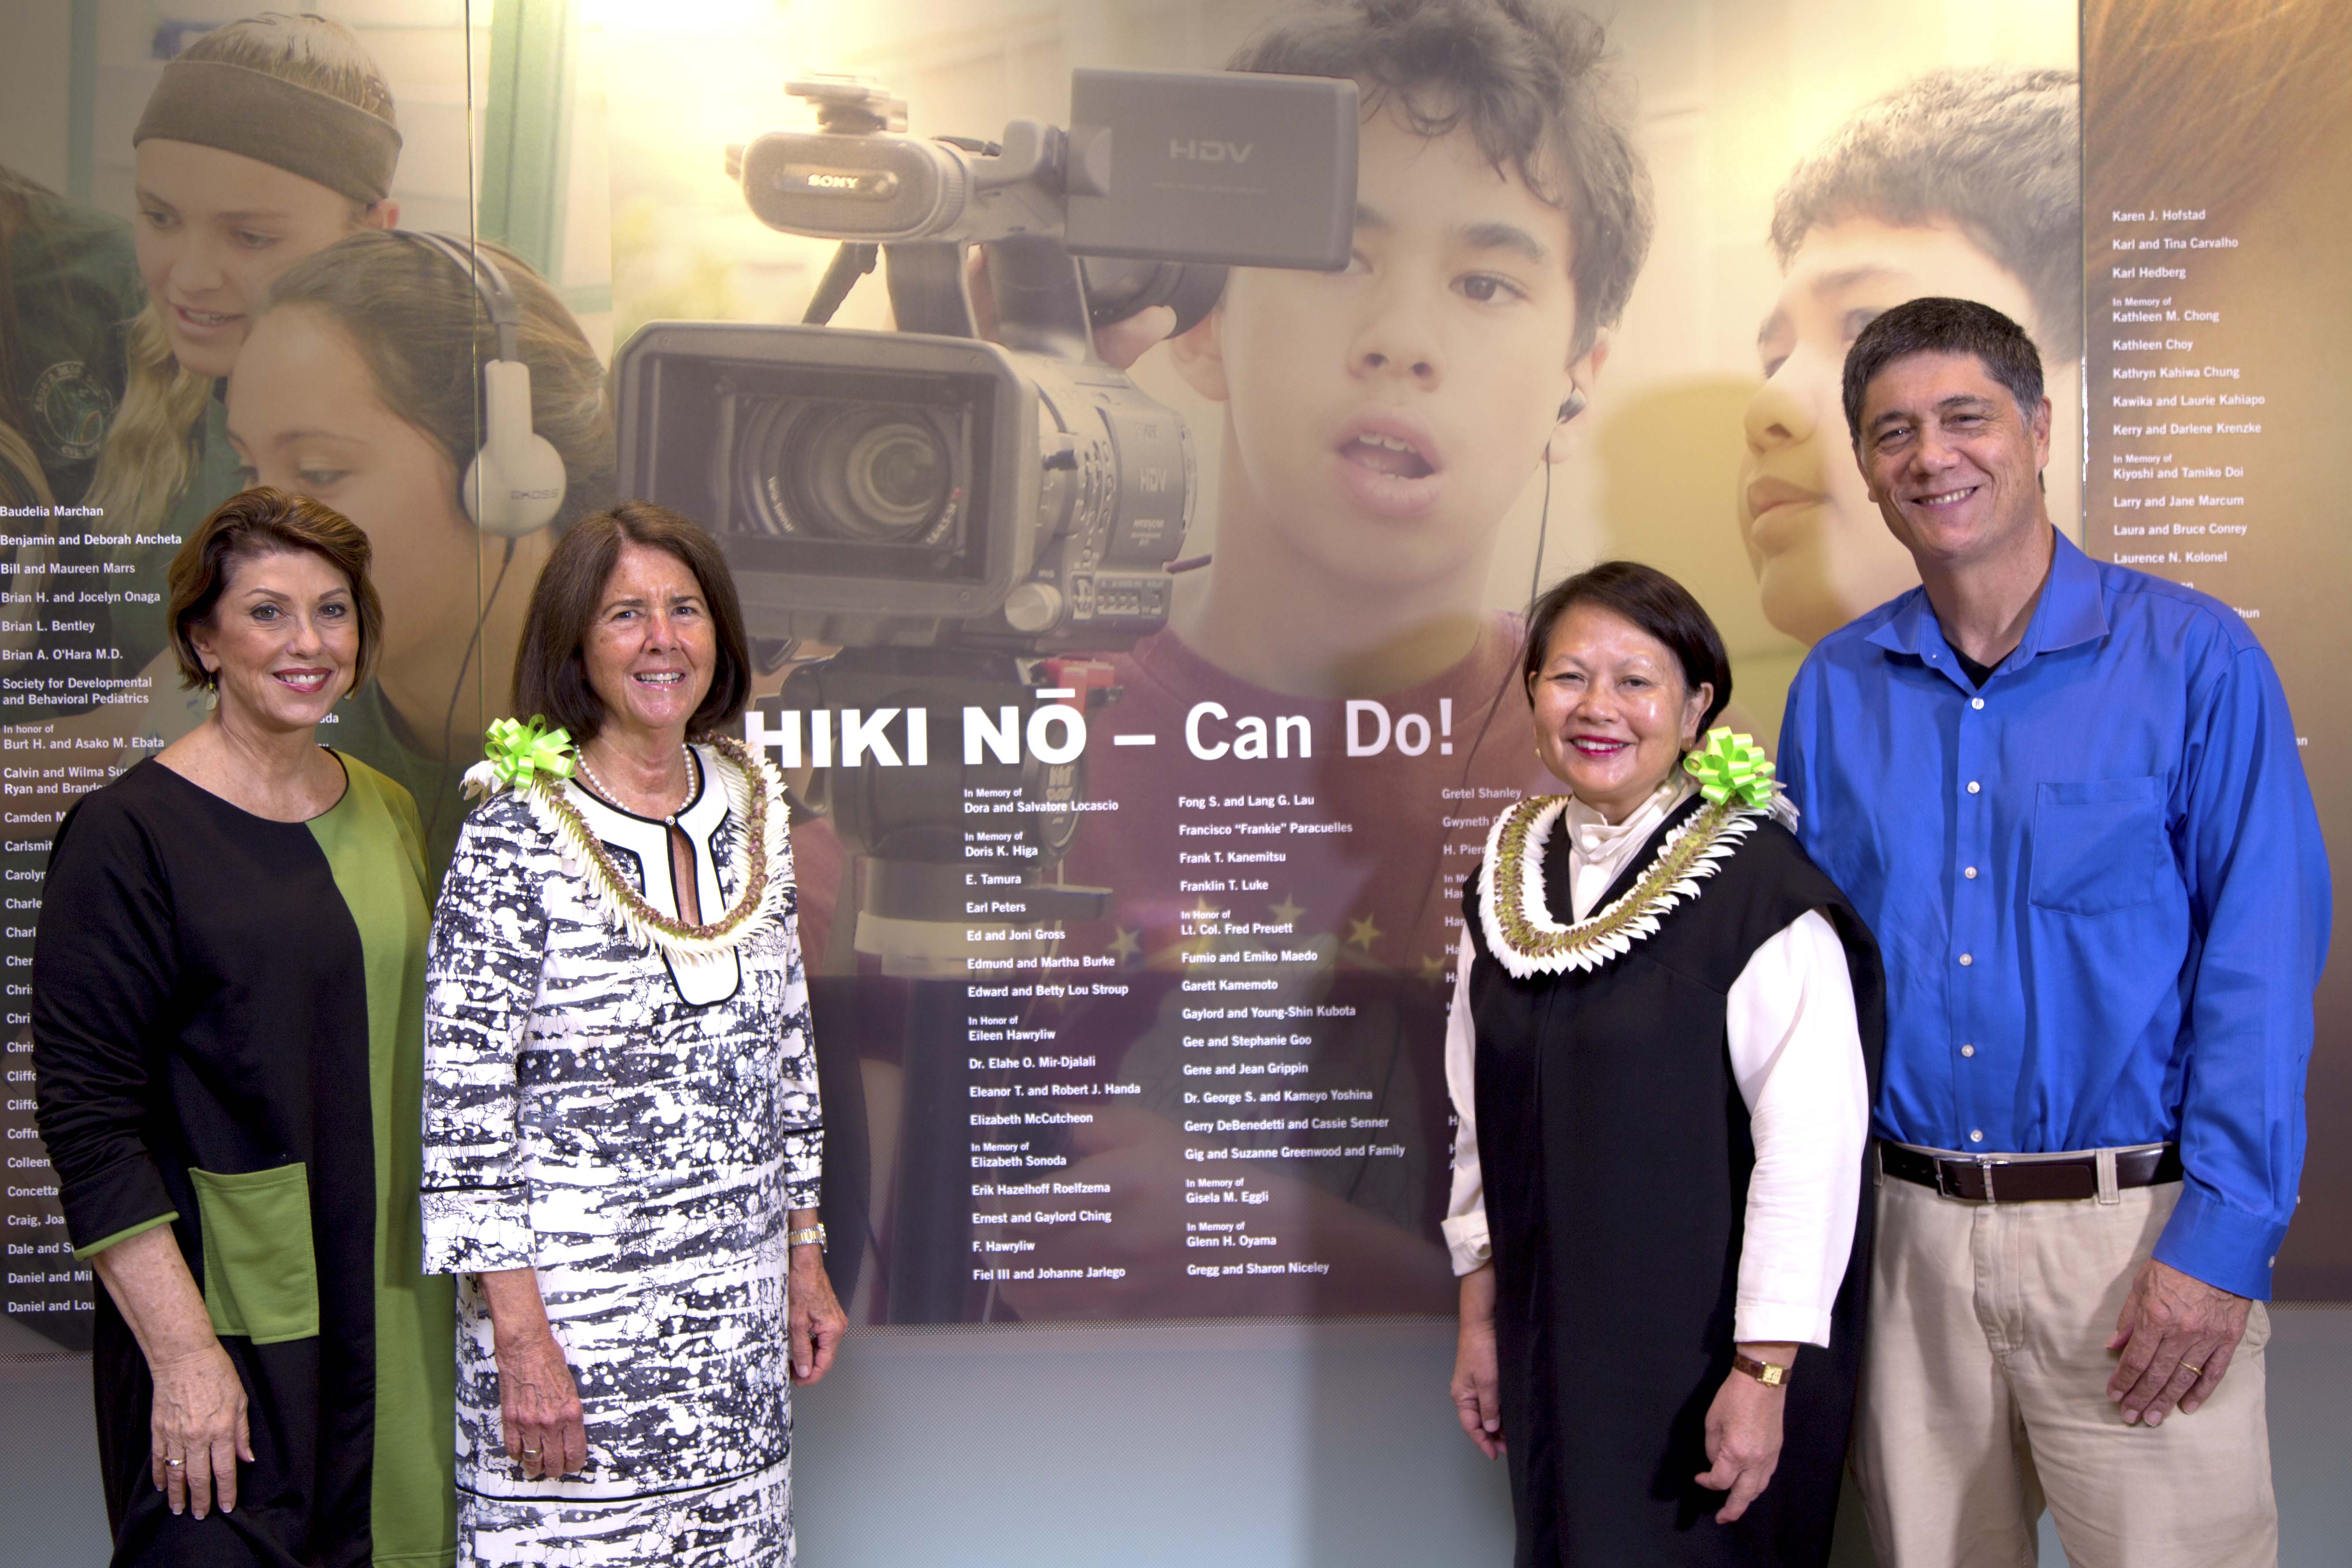 From left: Leslie Wilcox , PBS Hawai‘i President and CEO; Mary Bitterman, Bank of Hawaii Board of Directors Lead Independent Director; Donna Tanoue, Bank of Hawaii Foundation President; Robert Pennybacker, PBS Hawai‘i Director of Learning Initiatives.